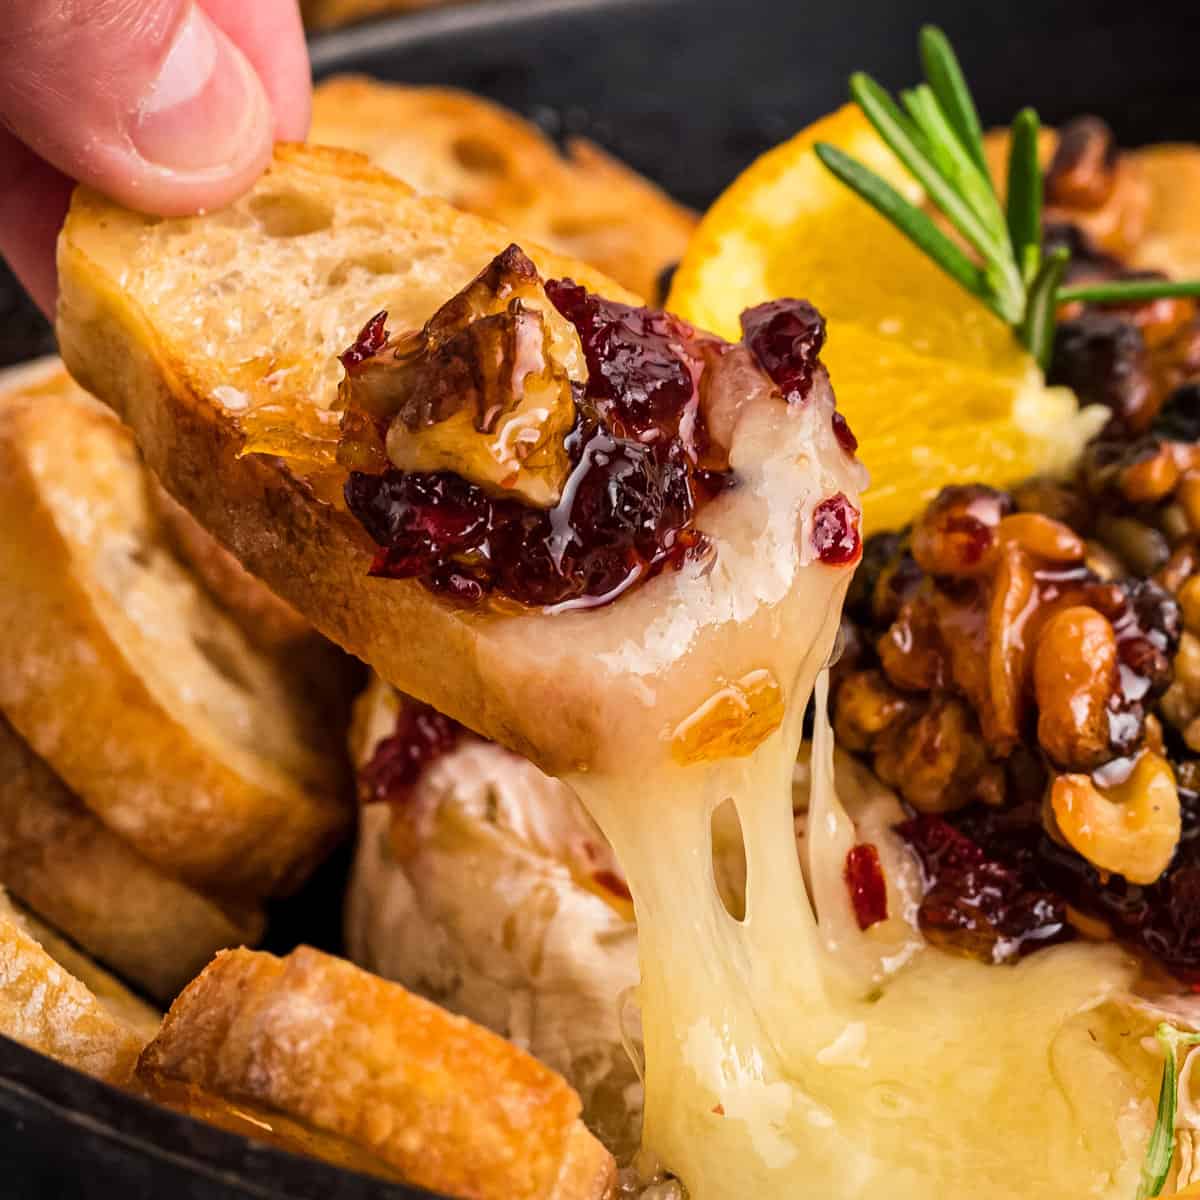 https://www.thechunkychef.com/wp-content/uploads/2022/11/Cranberry-Walnut-Baked-Brie-recipe-card.jpg